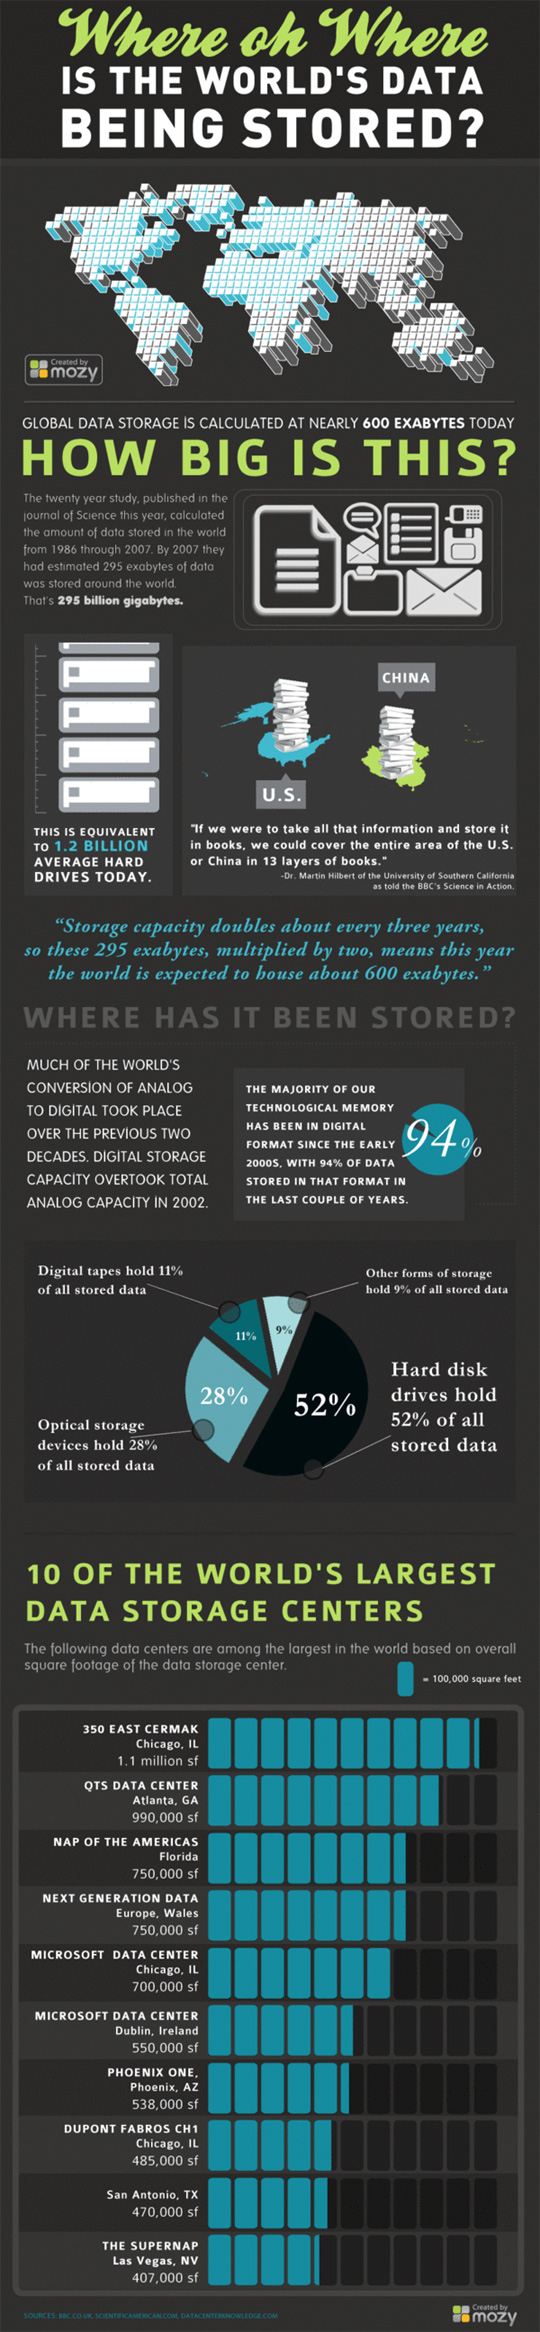 Where Oh Where: Current State Of World's Data Storage (Infographic) 9